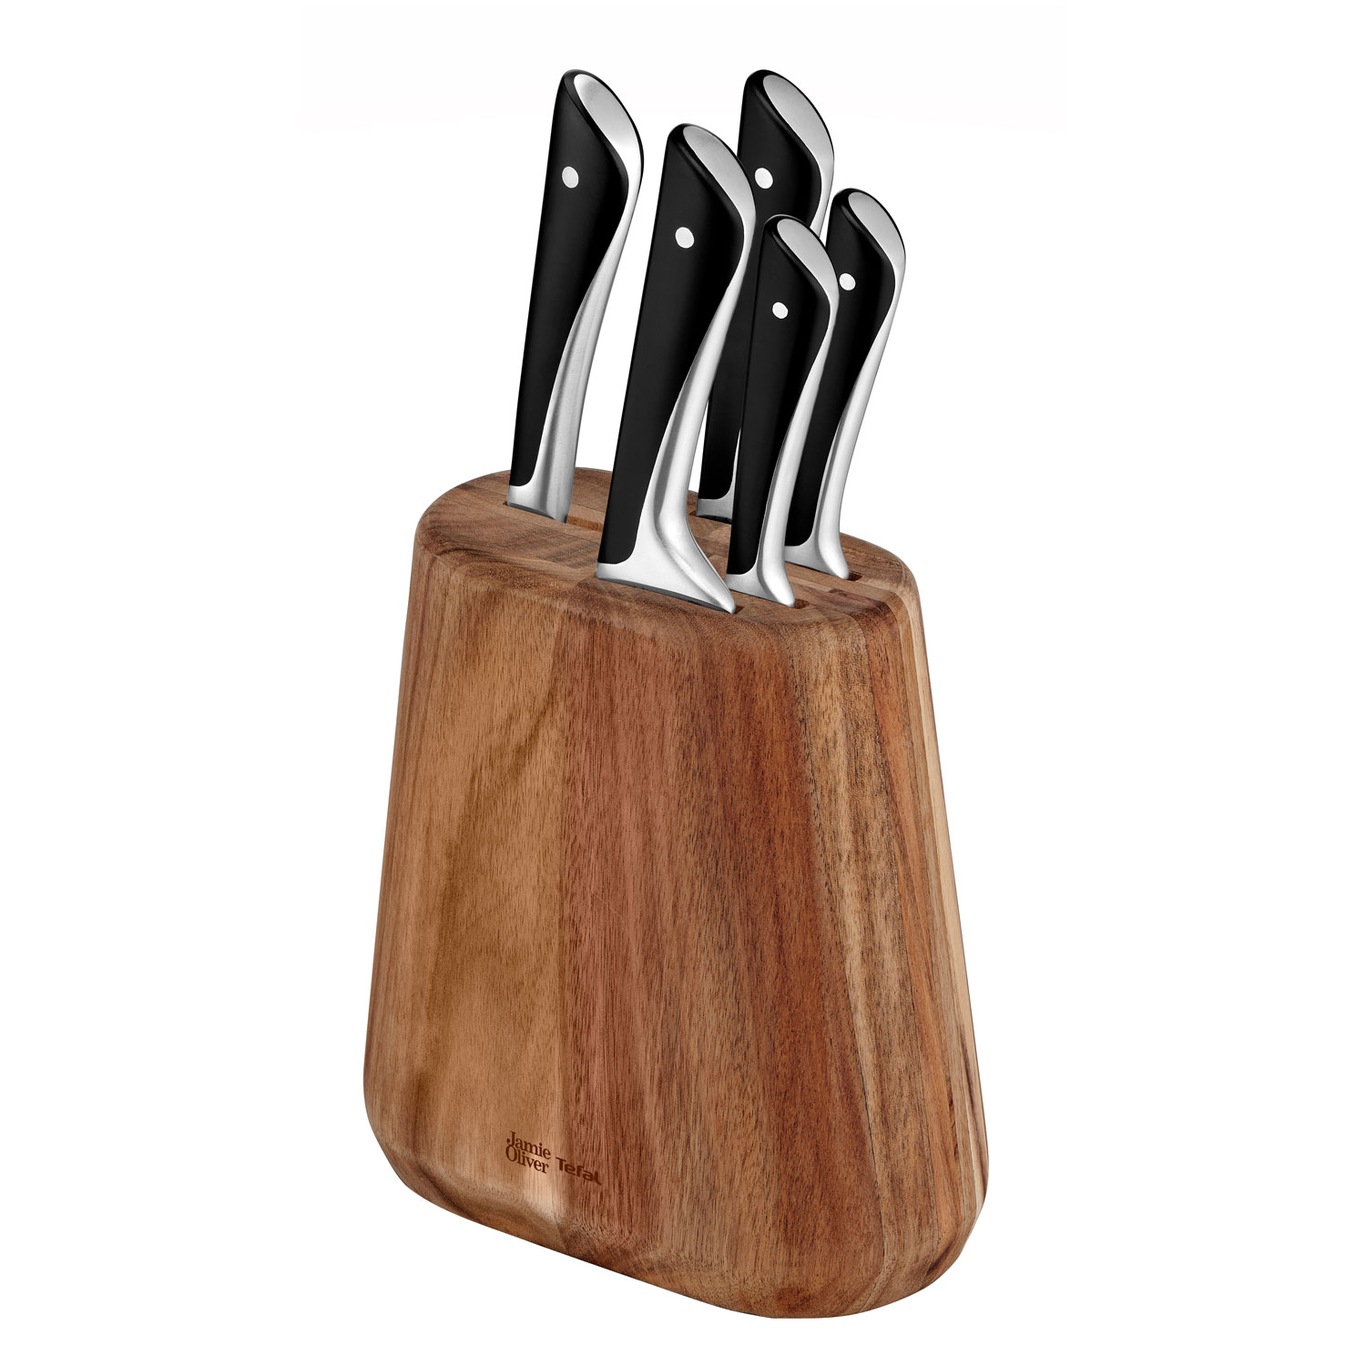 Jamie Oliver Knife Block With 5 Knives